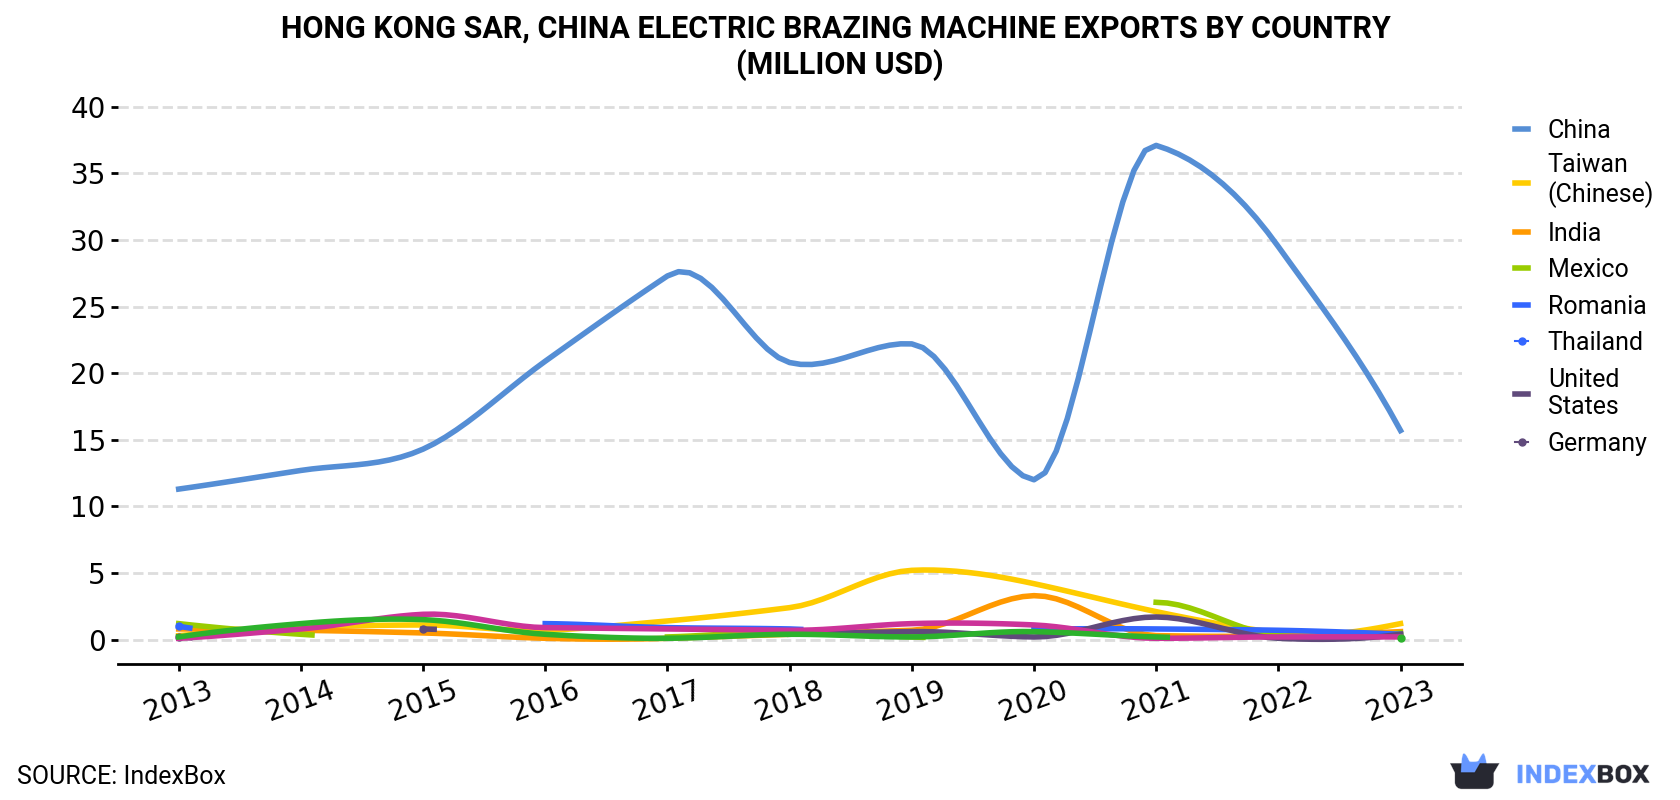 Hong Kong Electric Brazing Machine Exports By Country (Million USD)